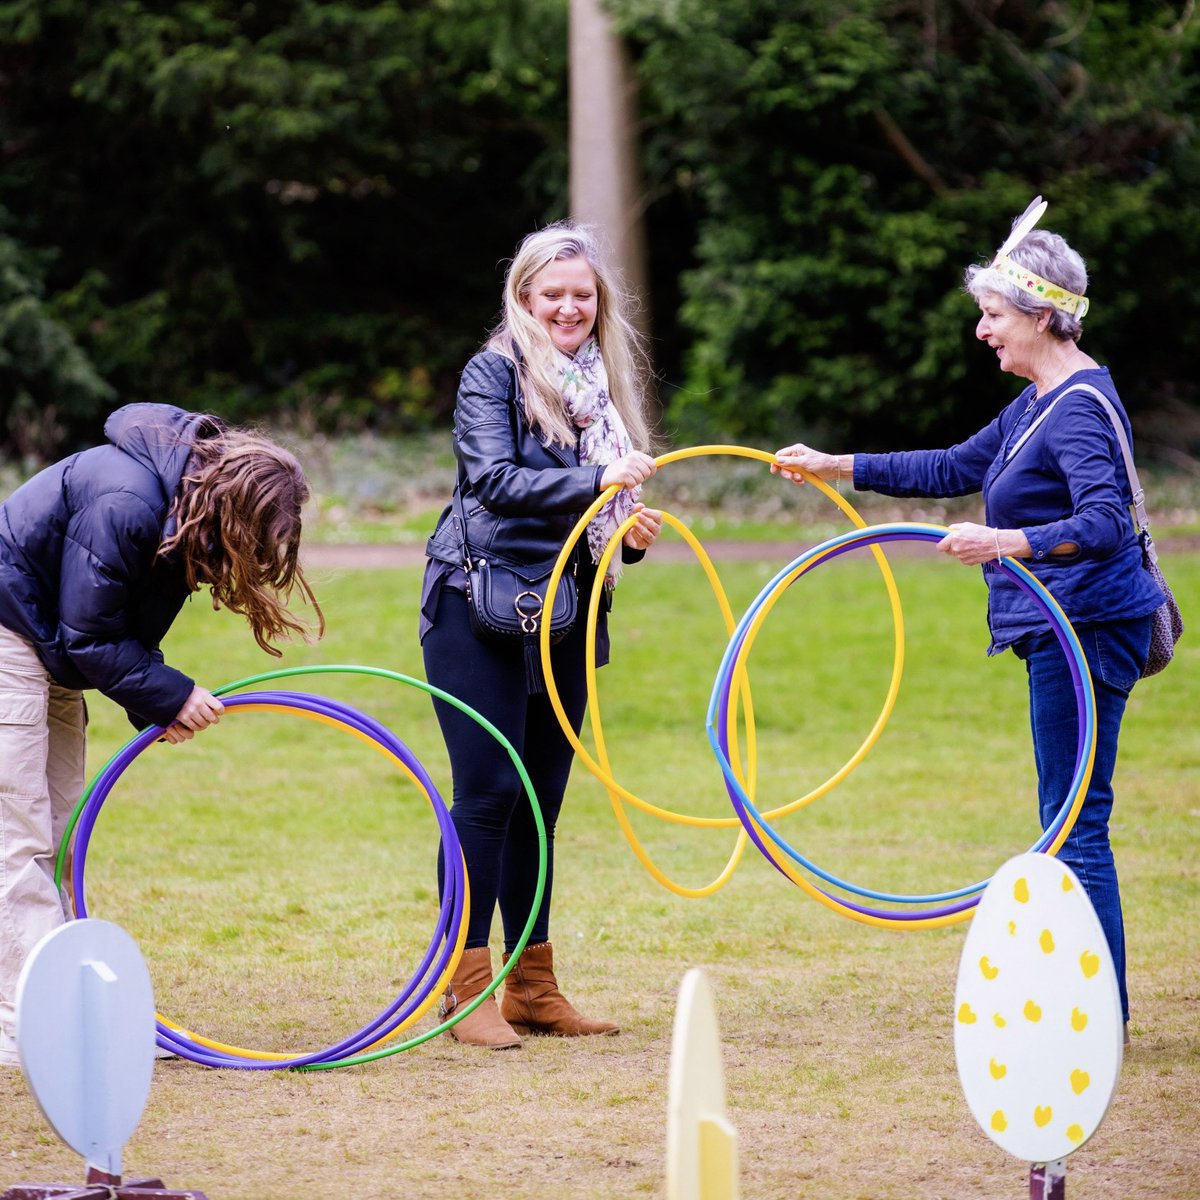 Come to Osterley Park and House for an Easter Hunt Egg with summer fair–themed activities & games to play as a family surrounded by beautiful nature. Visit our Stables café for a host of Easter treats like Chocolate Easter egg nests 🪺 See bit.ly/OsterleyEvents for more info!